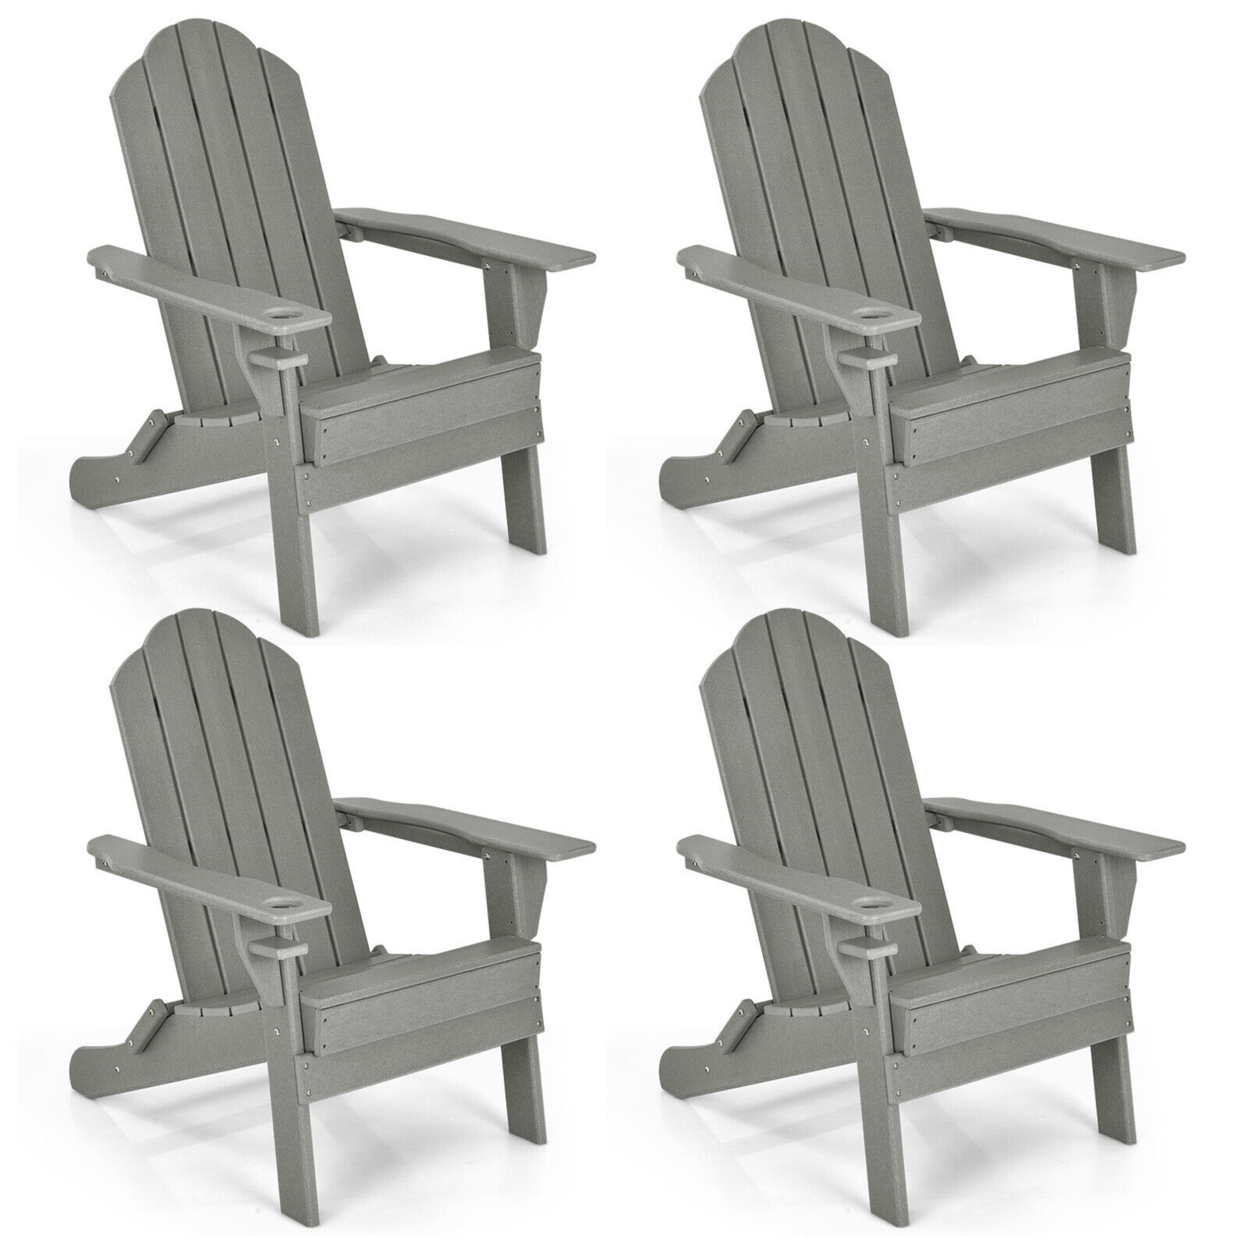 4PCS Patio Folding Adirondack Chair Weather Resistant Cup Holder Yard - Grey